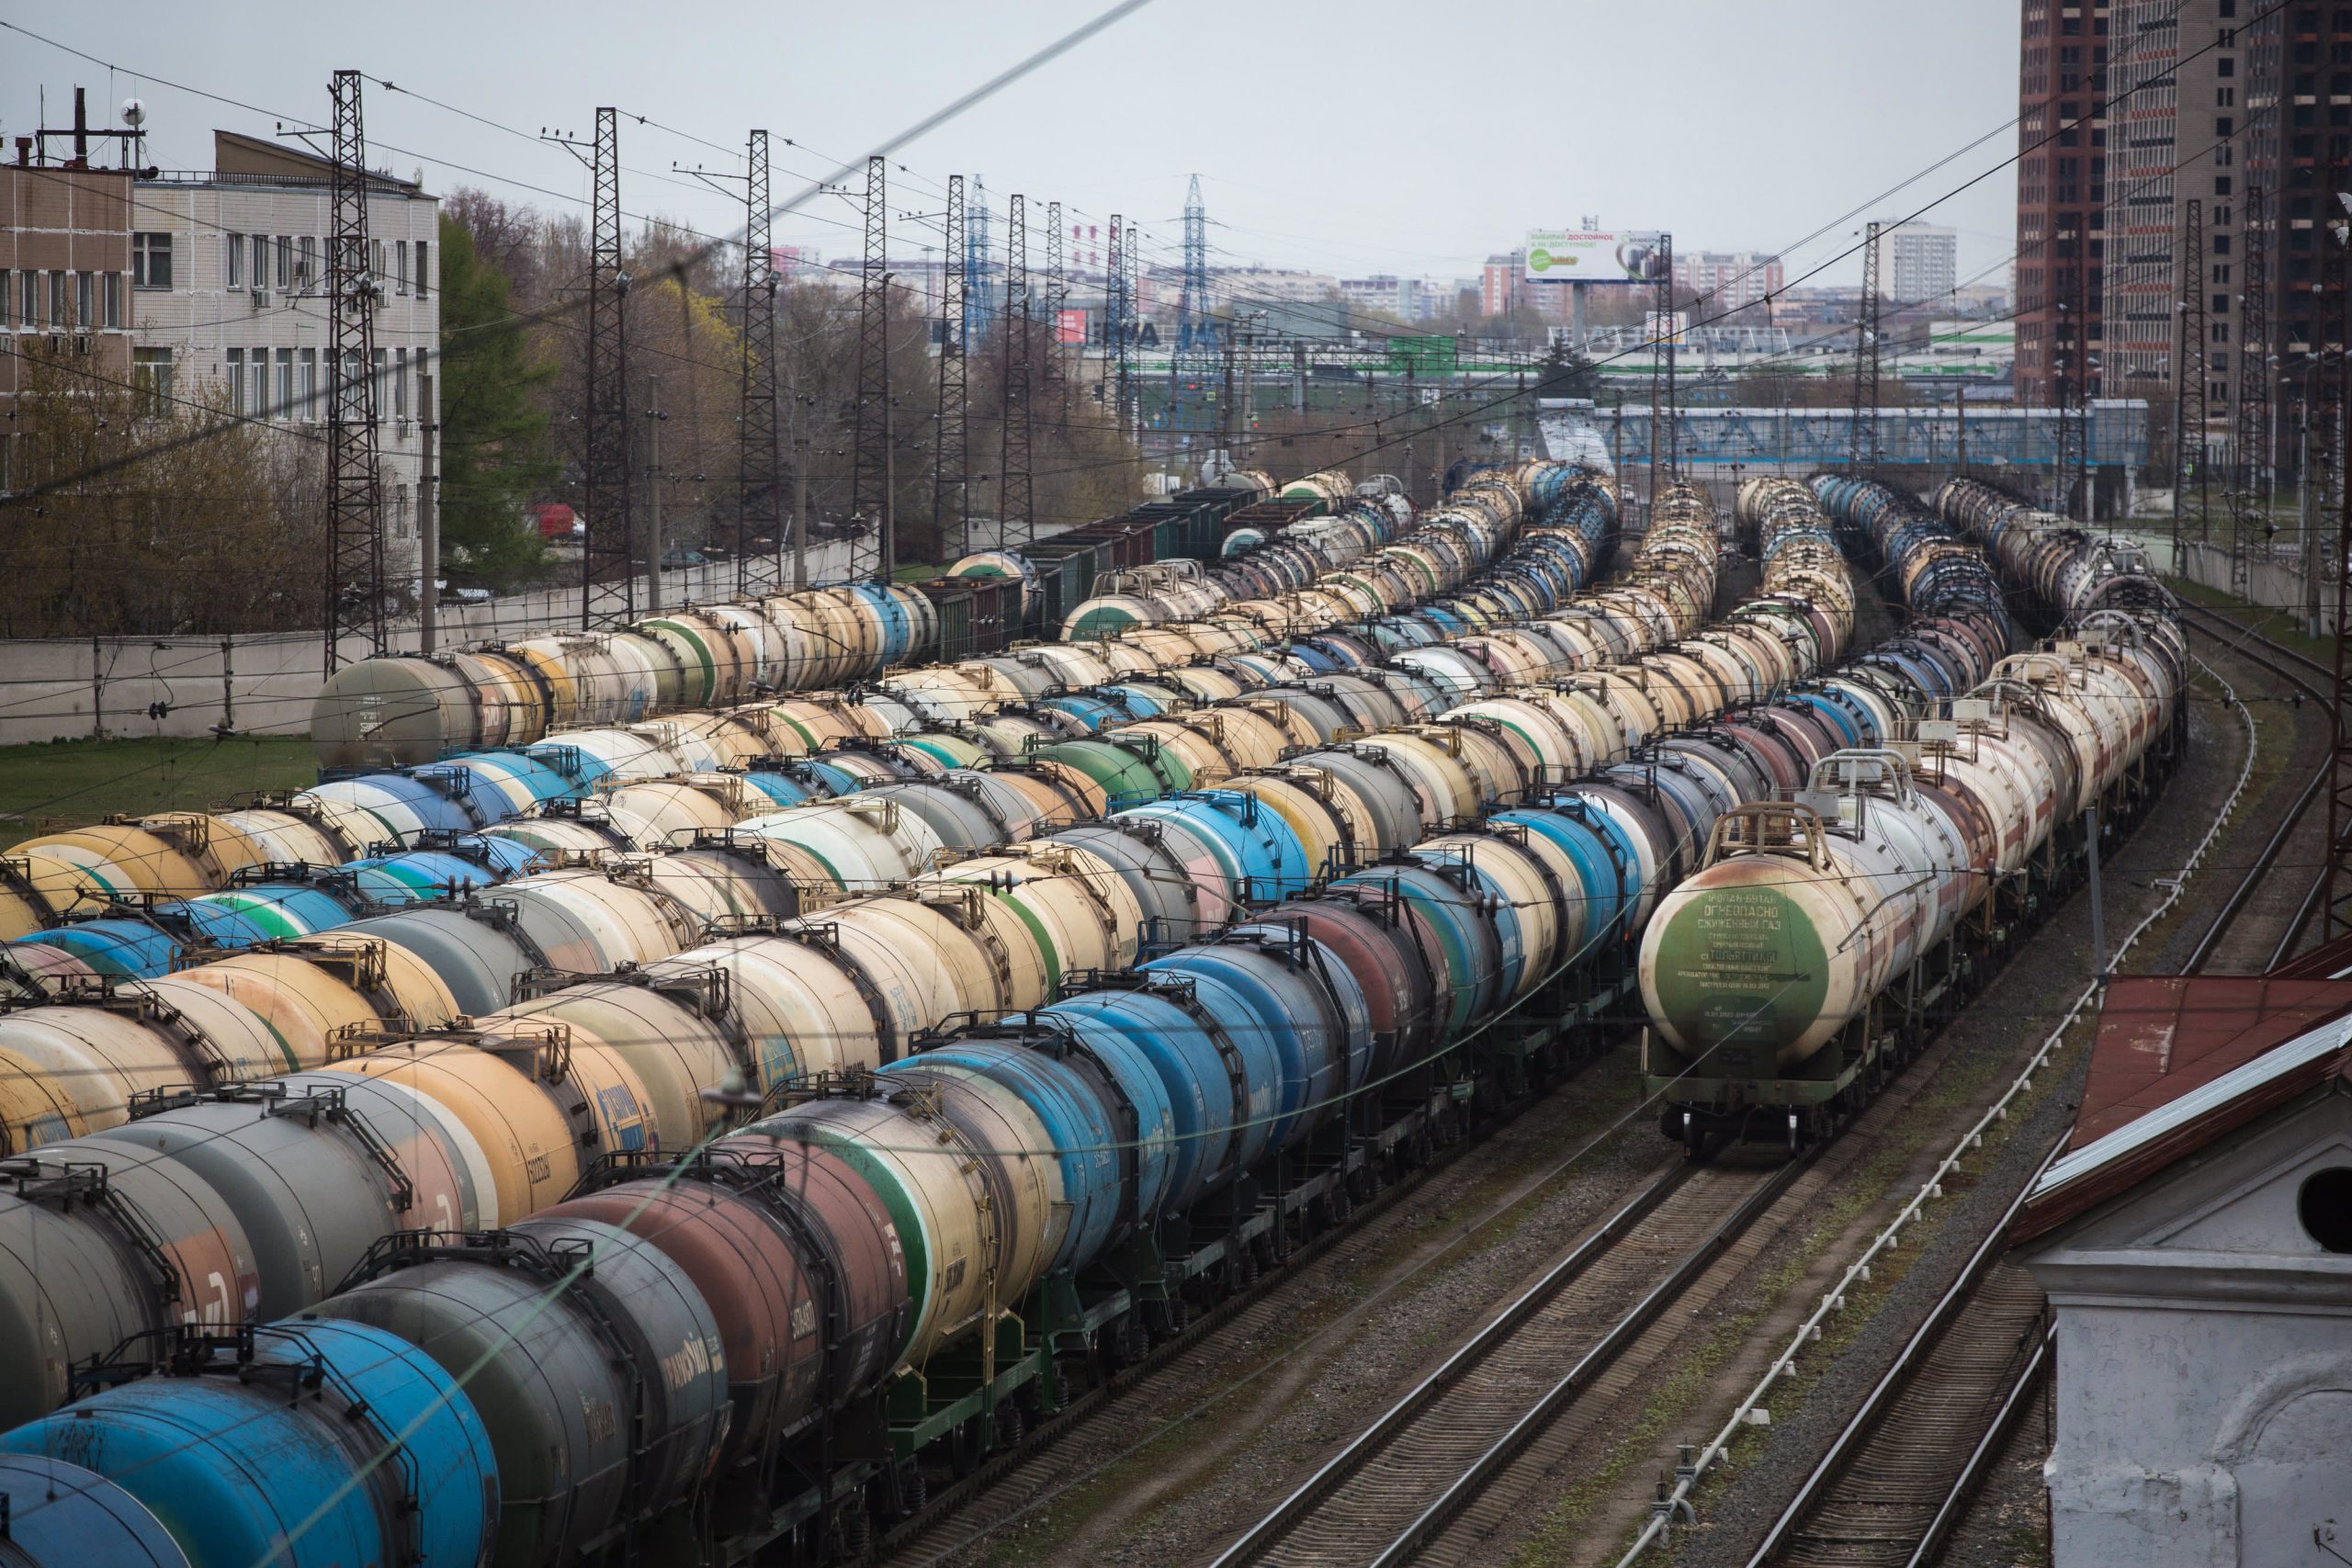 Analysts say alternative supplies will not be able to completely replace Russian oil